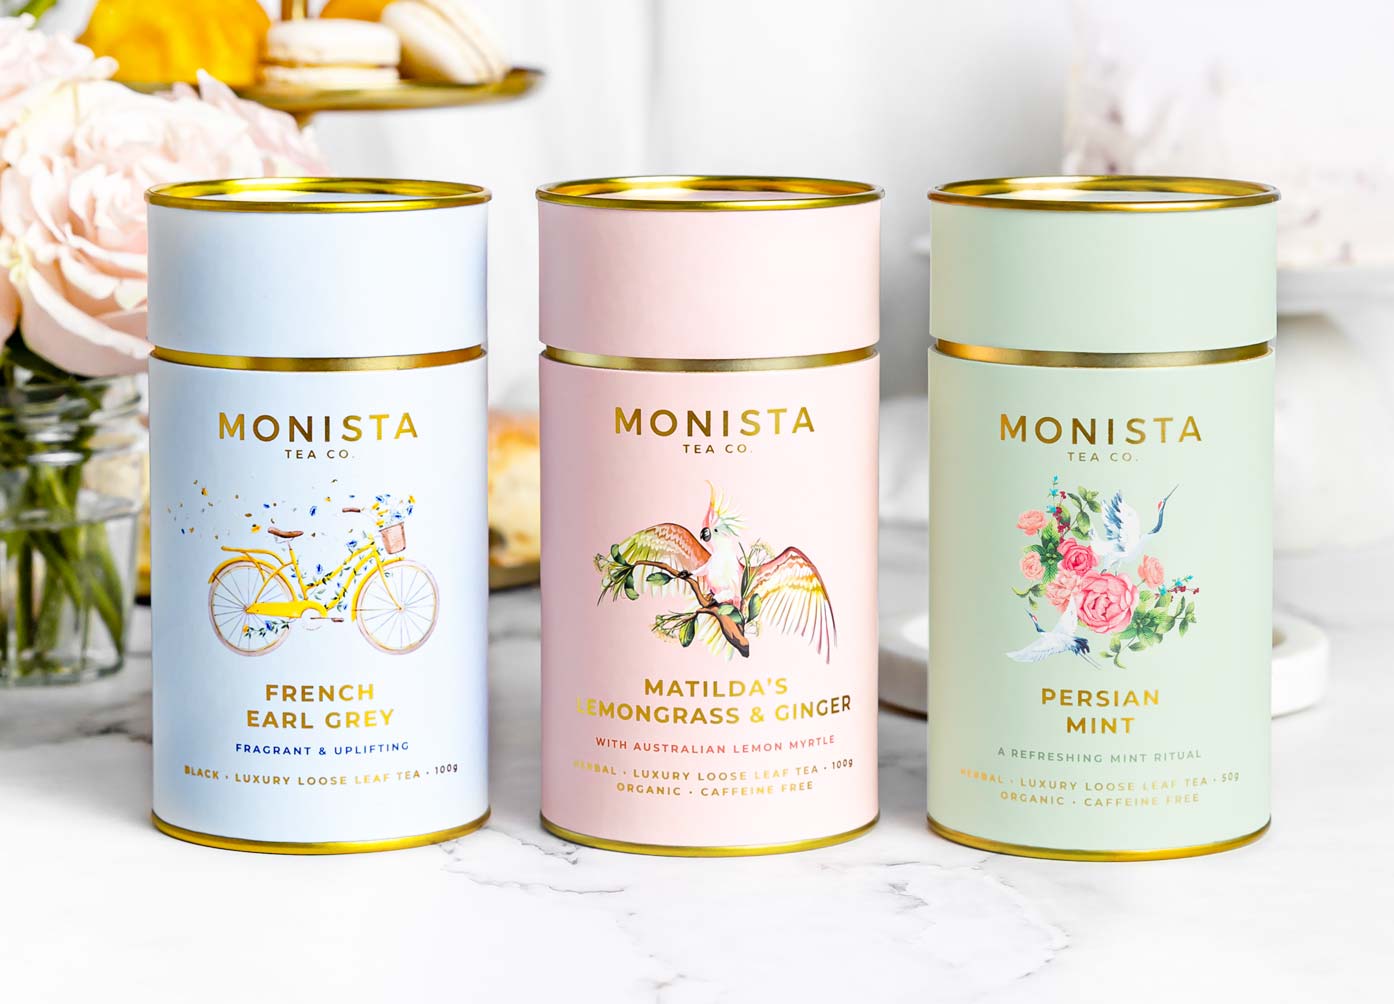 Monista tea canisters in blue, pink and green